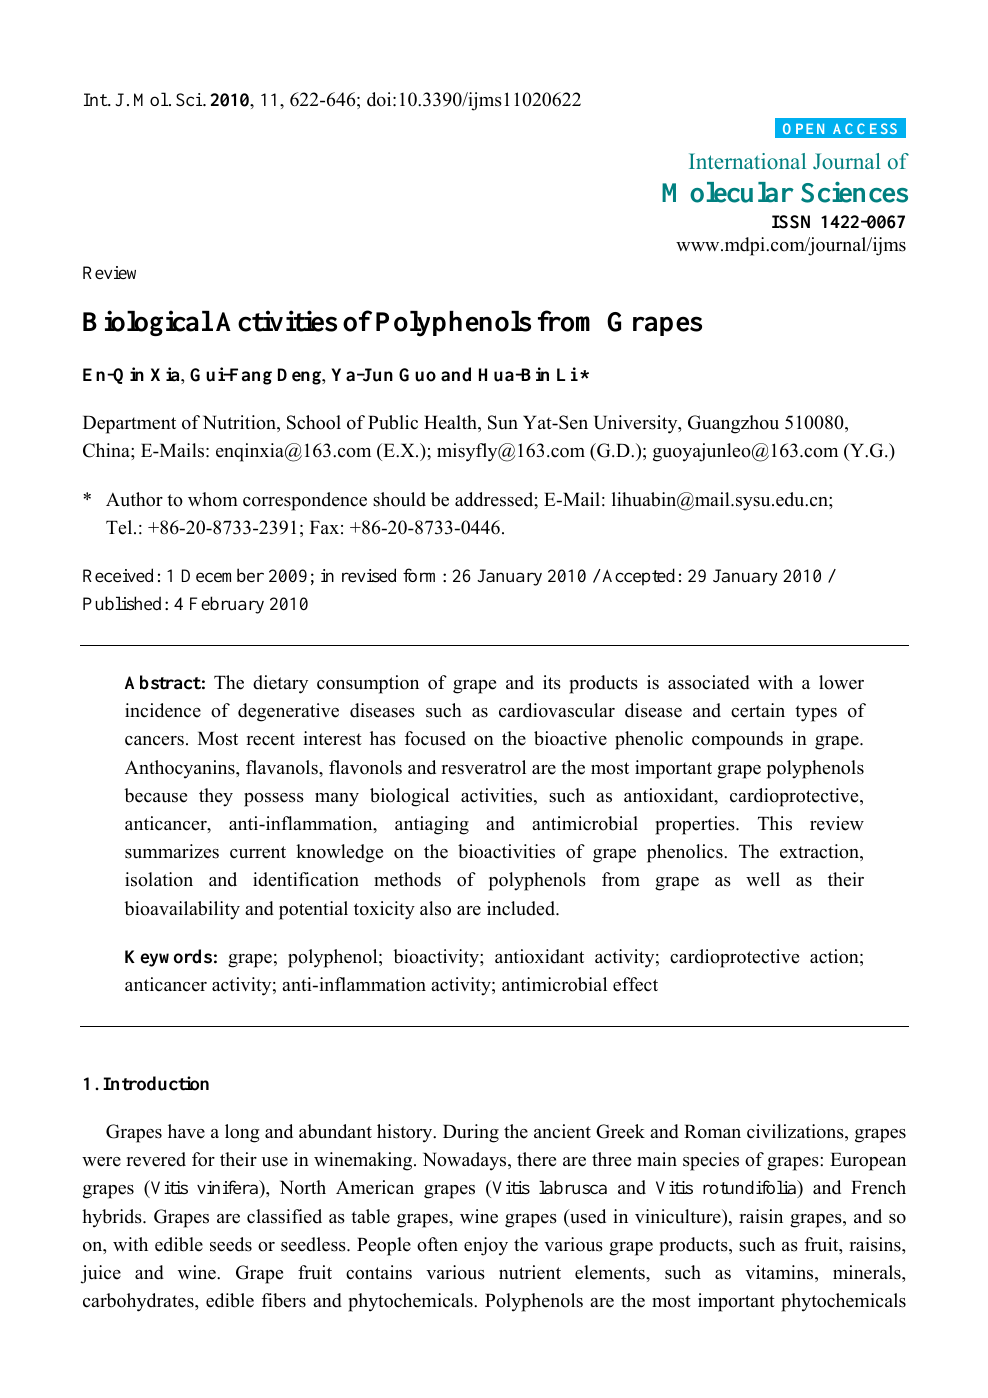 Biological Activities Of Polyphenols From Grapes Topic Of Research Paper In Chemical Sciences Download Scholarly Article Pdf And Read For Free On Cyberleninka Open Science Hub